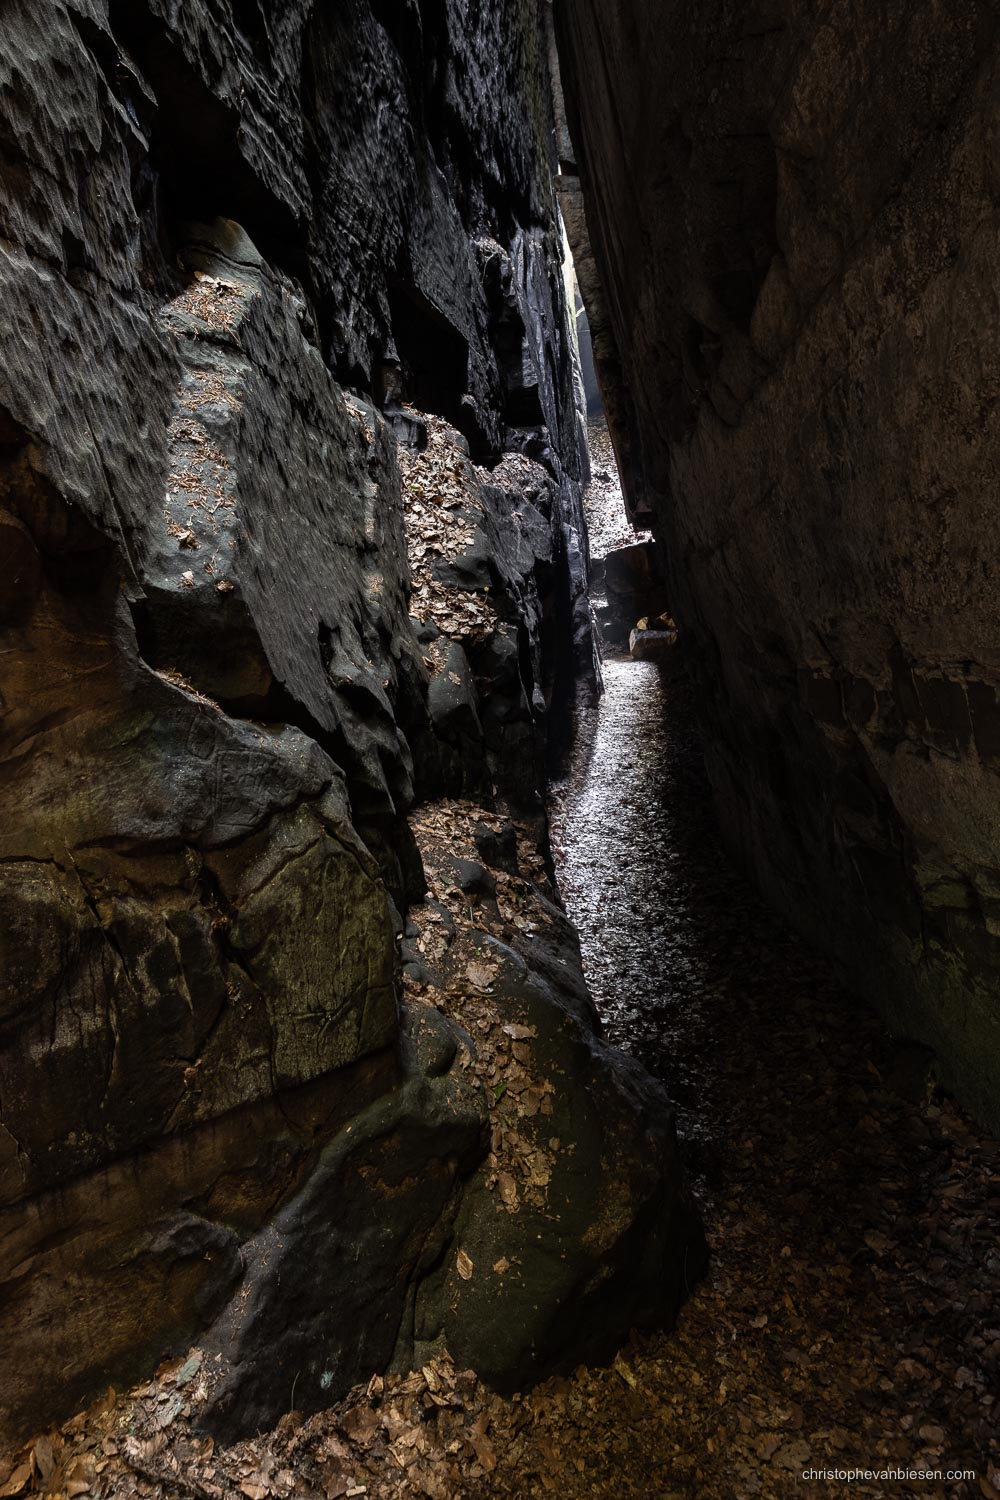 Visit the Mullerthal - Luxembourg - Narrow and dark passages in the Mullerthal Goldfralay caverns - A Light in the Dark